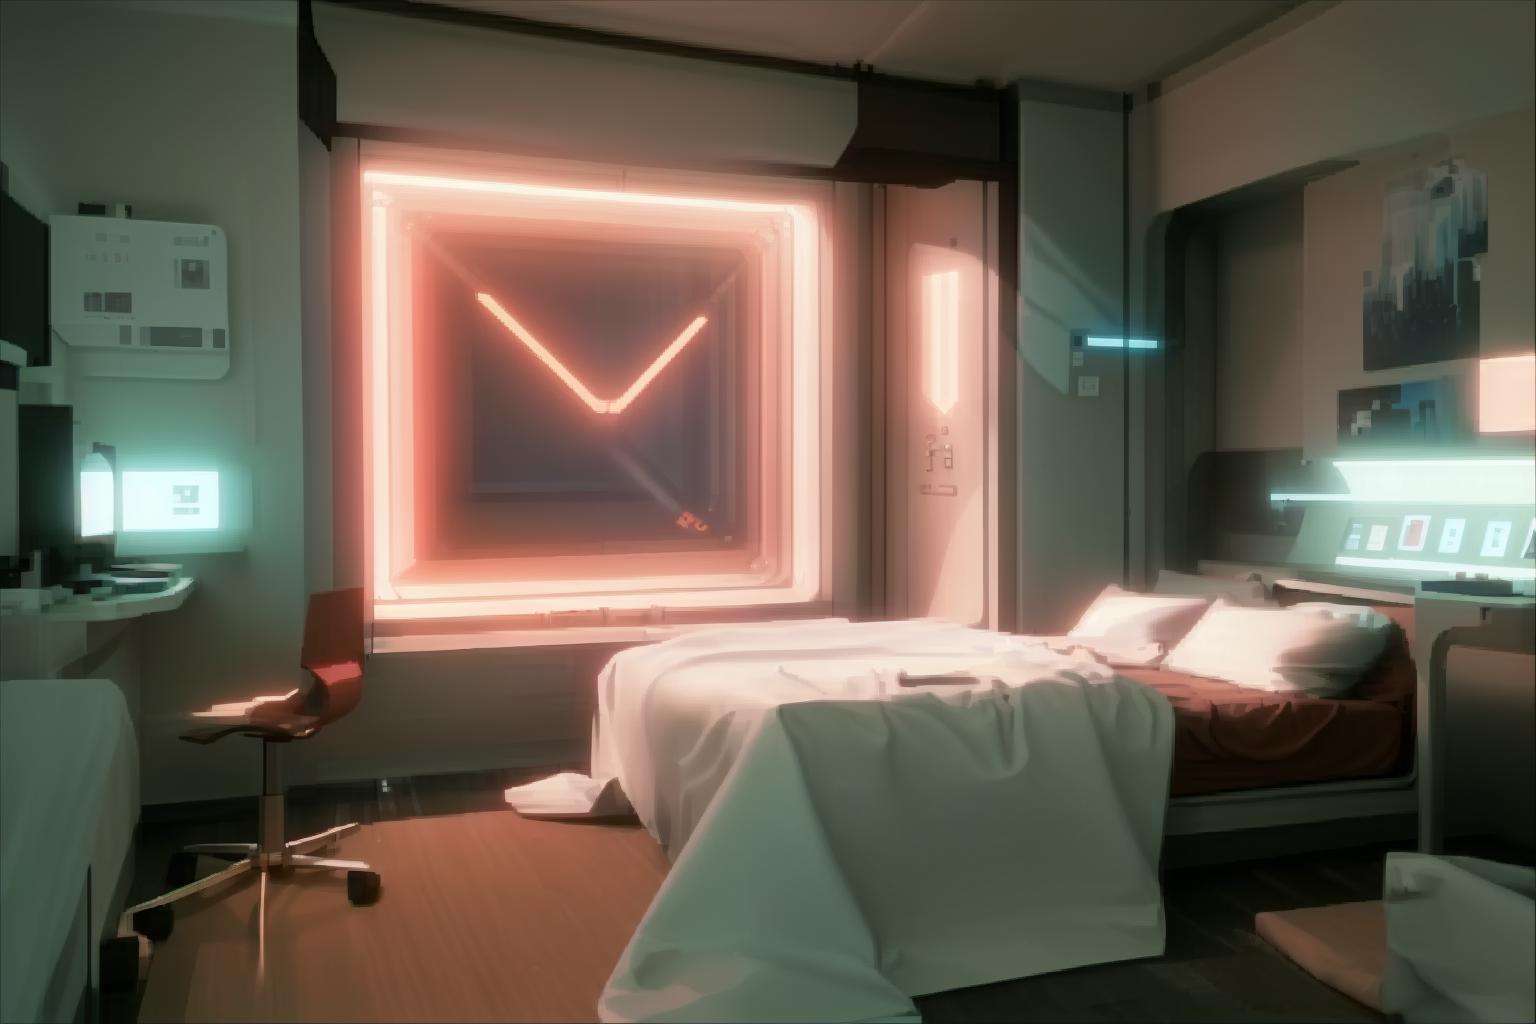 a room with a large window and a bed in it with a tenné-(tawny) sheet on the floor and a rose line on the wall, Filip Hodas, cgstudio, computer graphics, space art , cyber_room  , cyberpunk ambient, a room